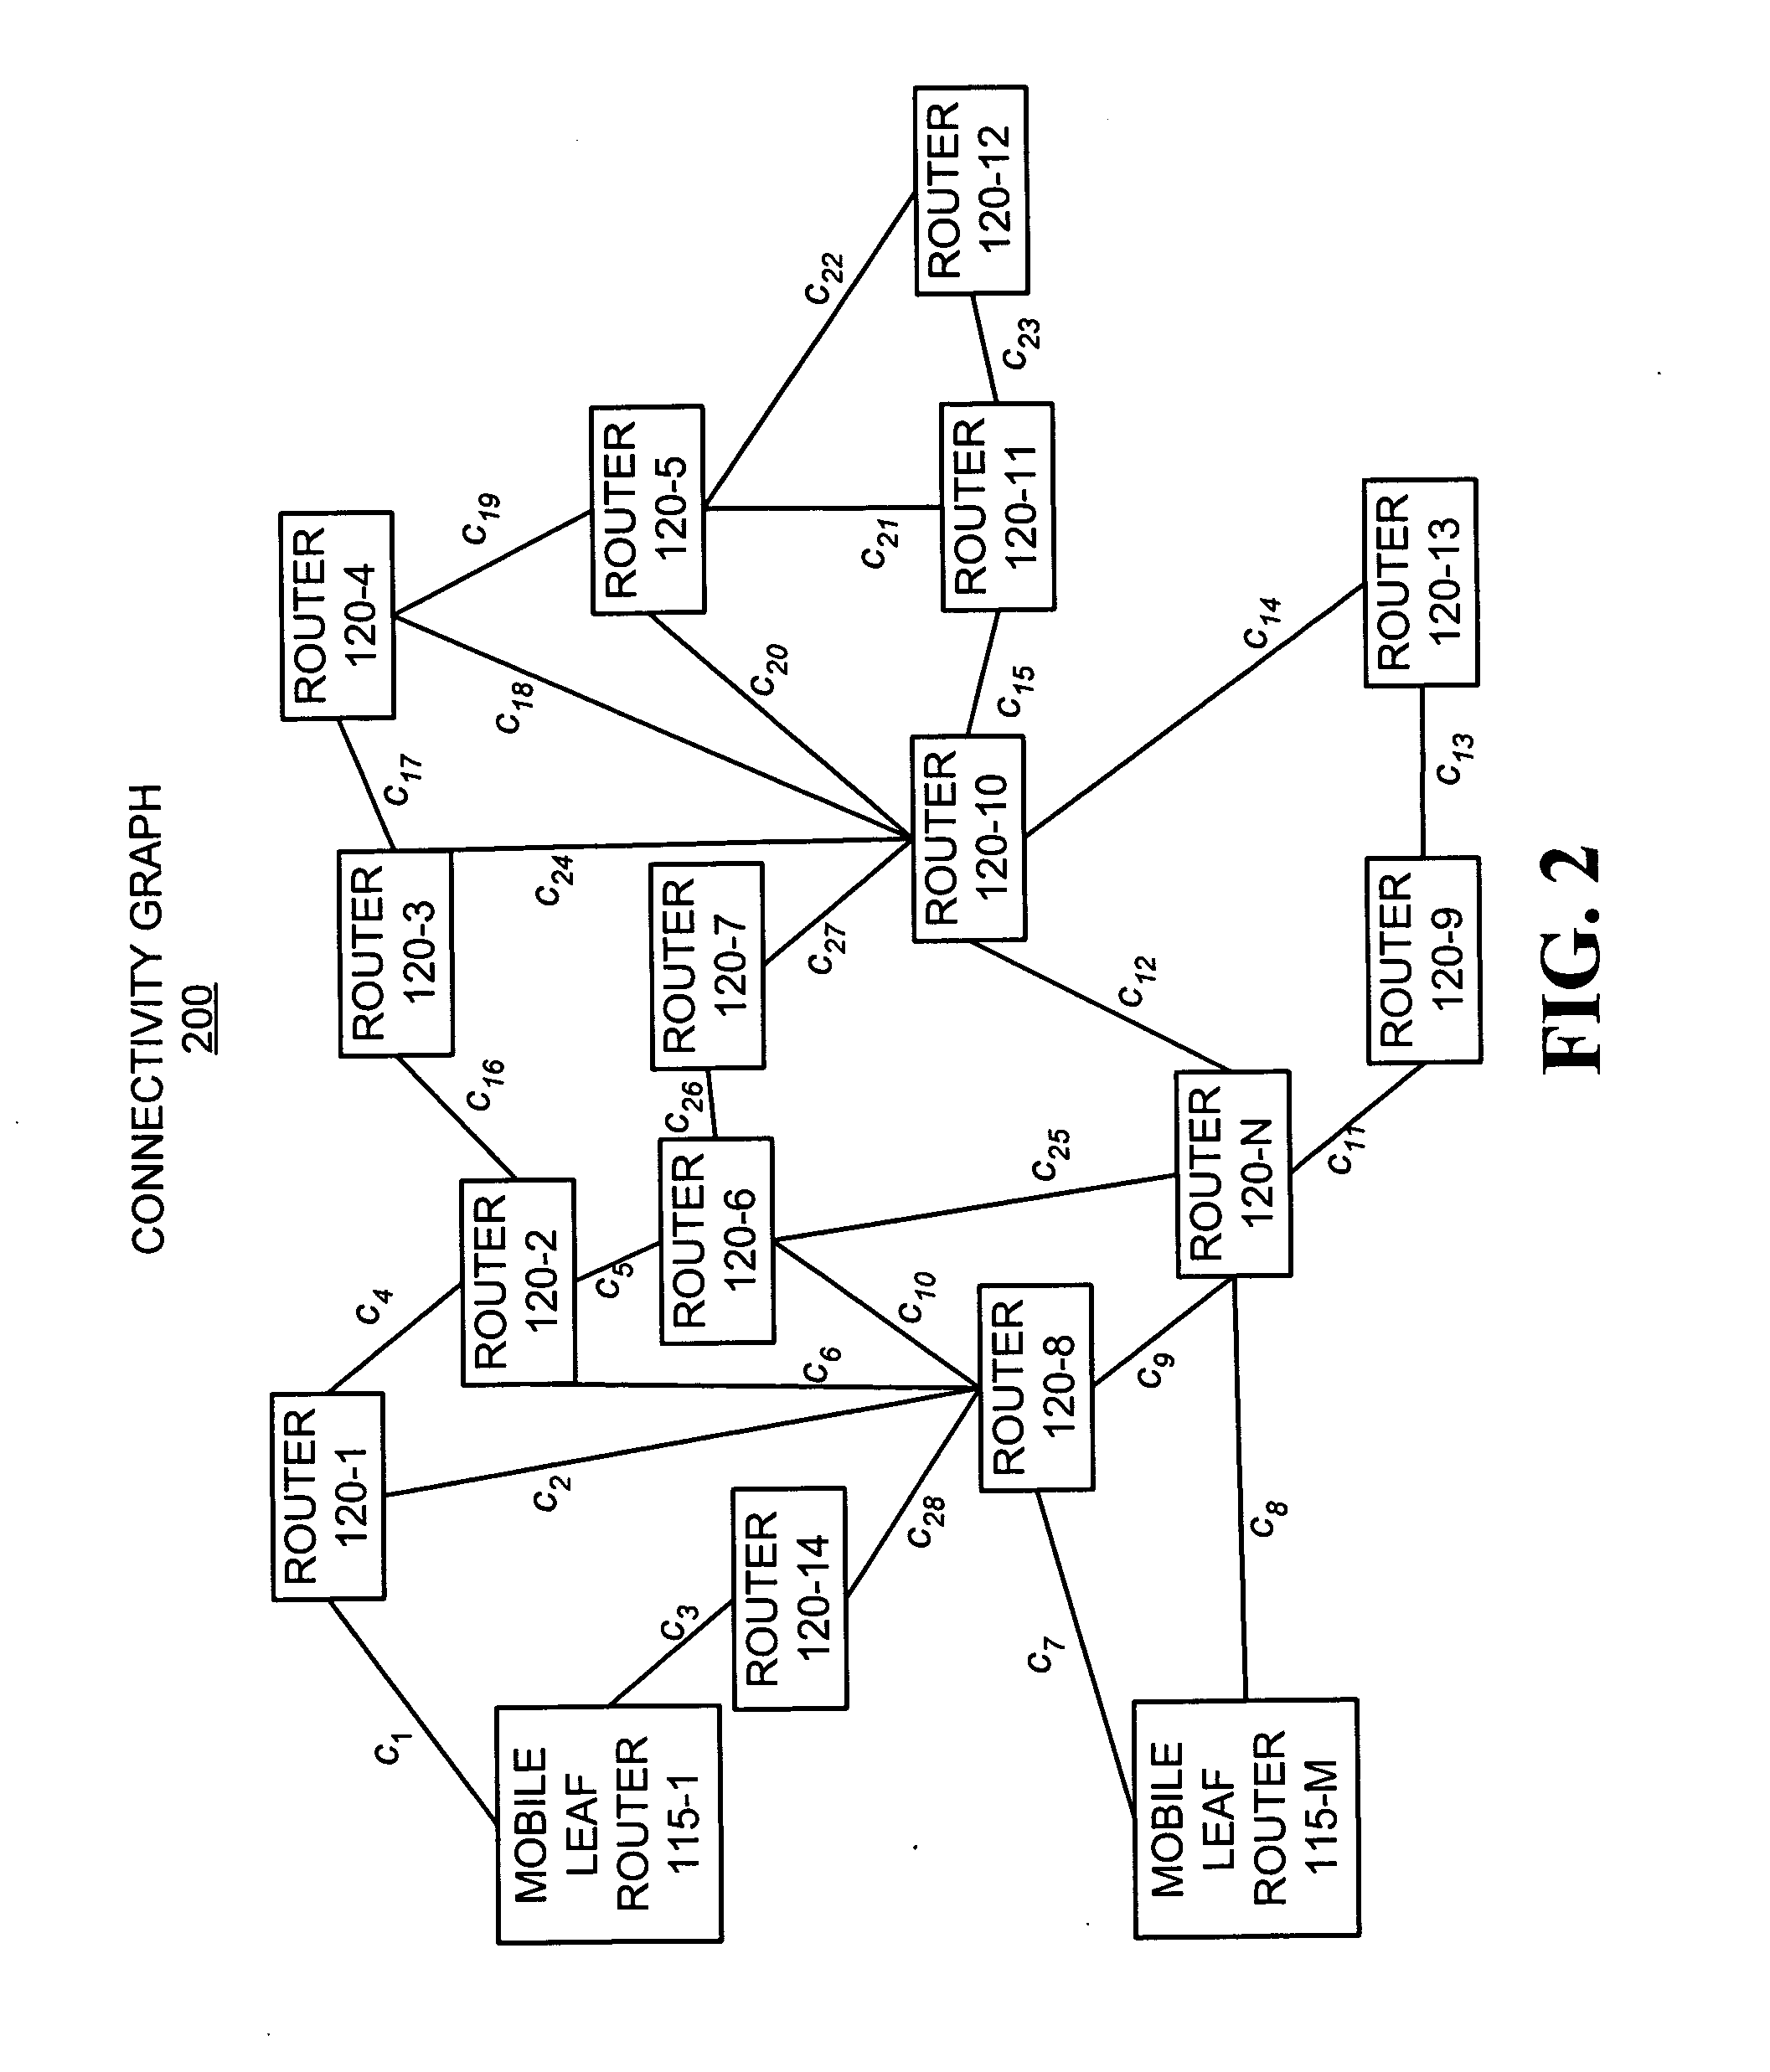 Systems and methods for forming an adjacency graph for exchanging network routing data